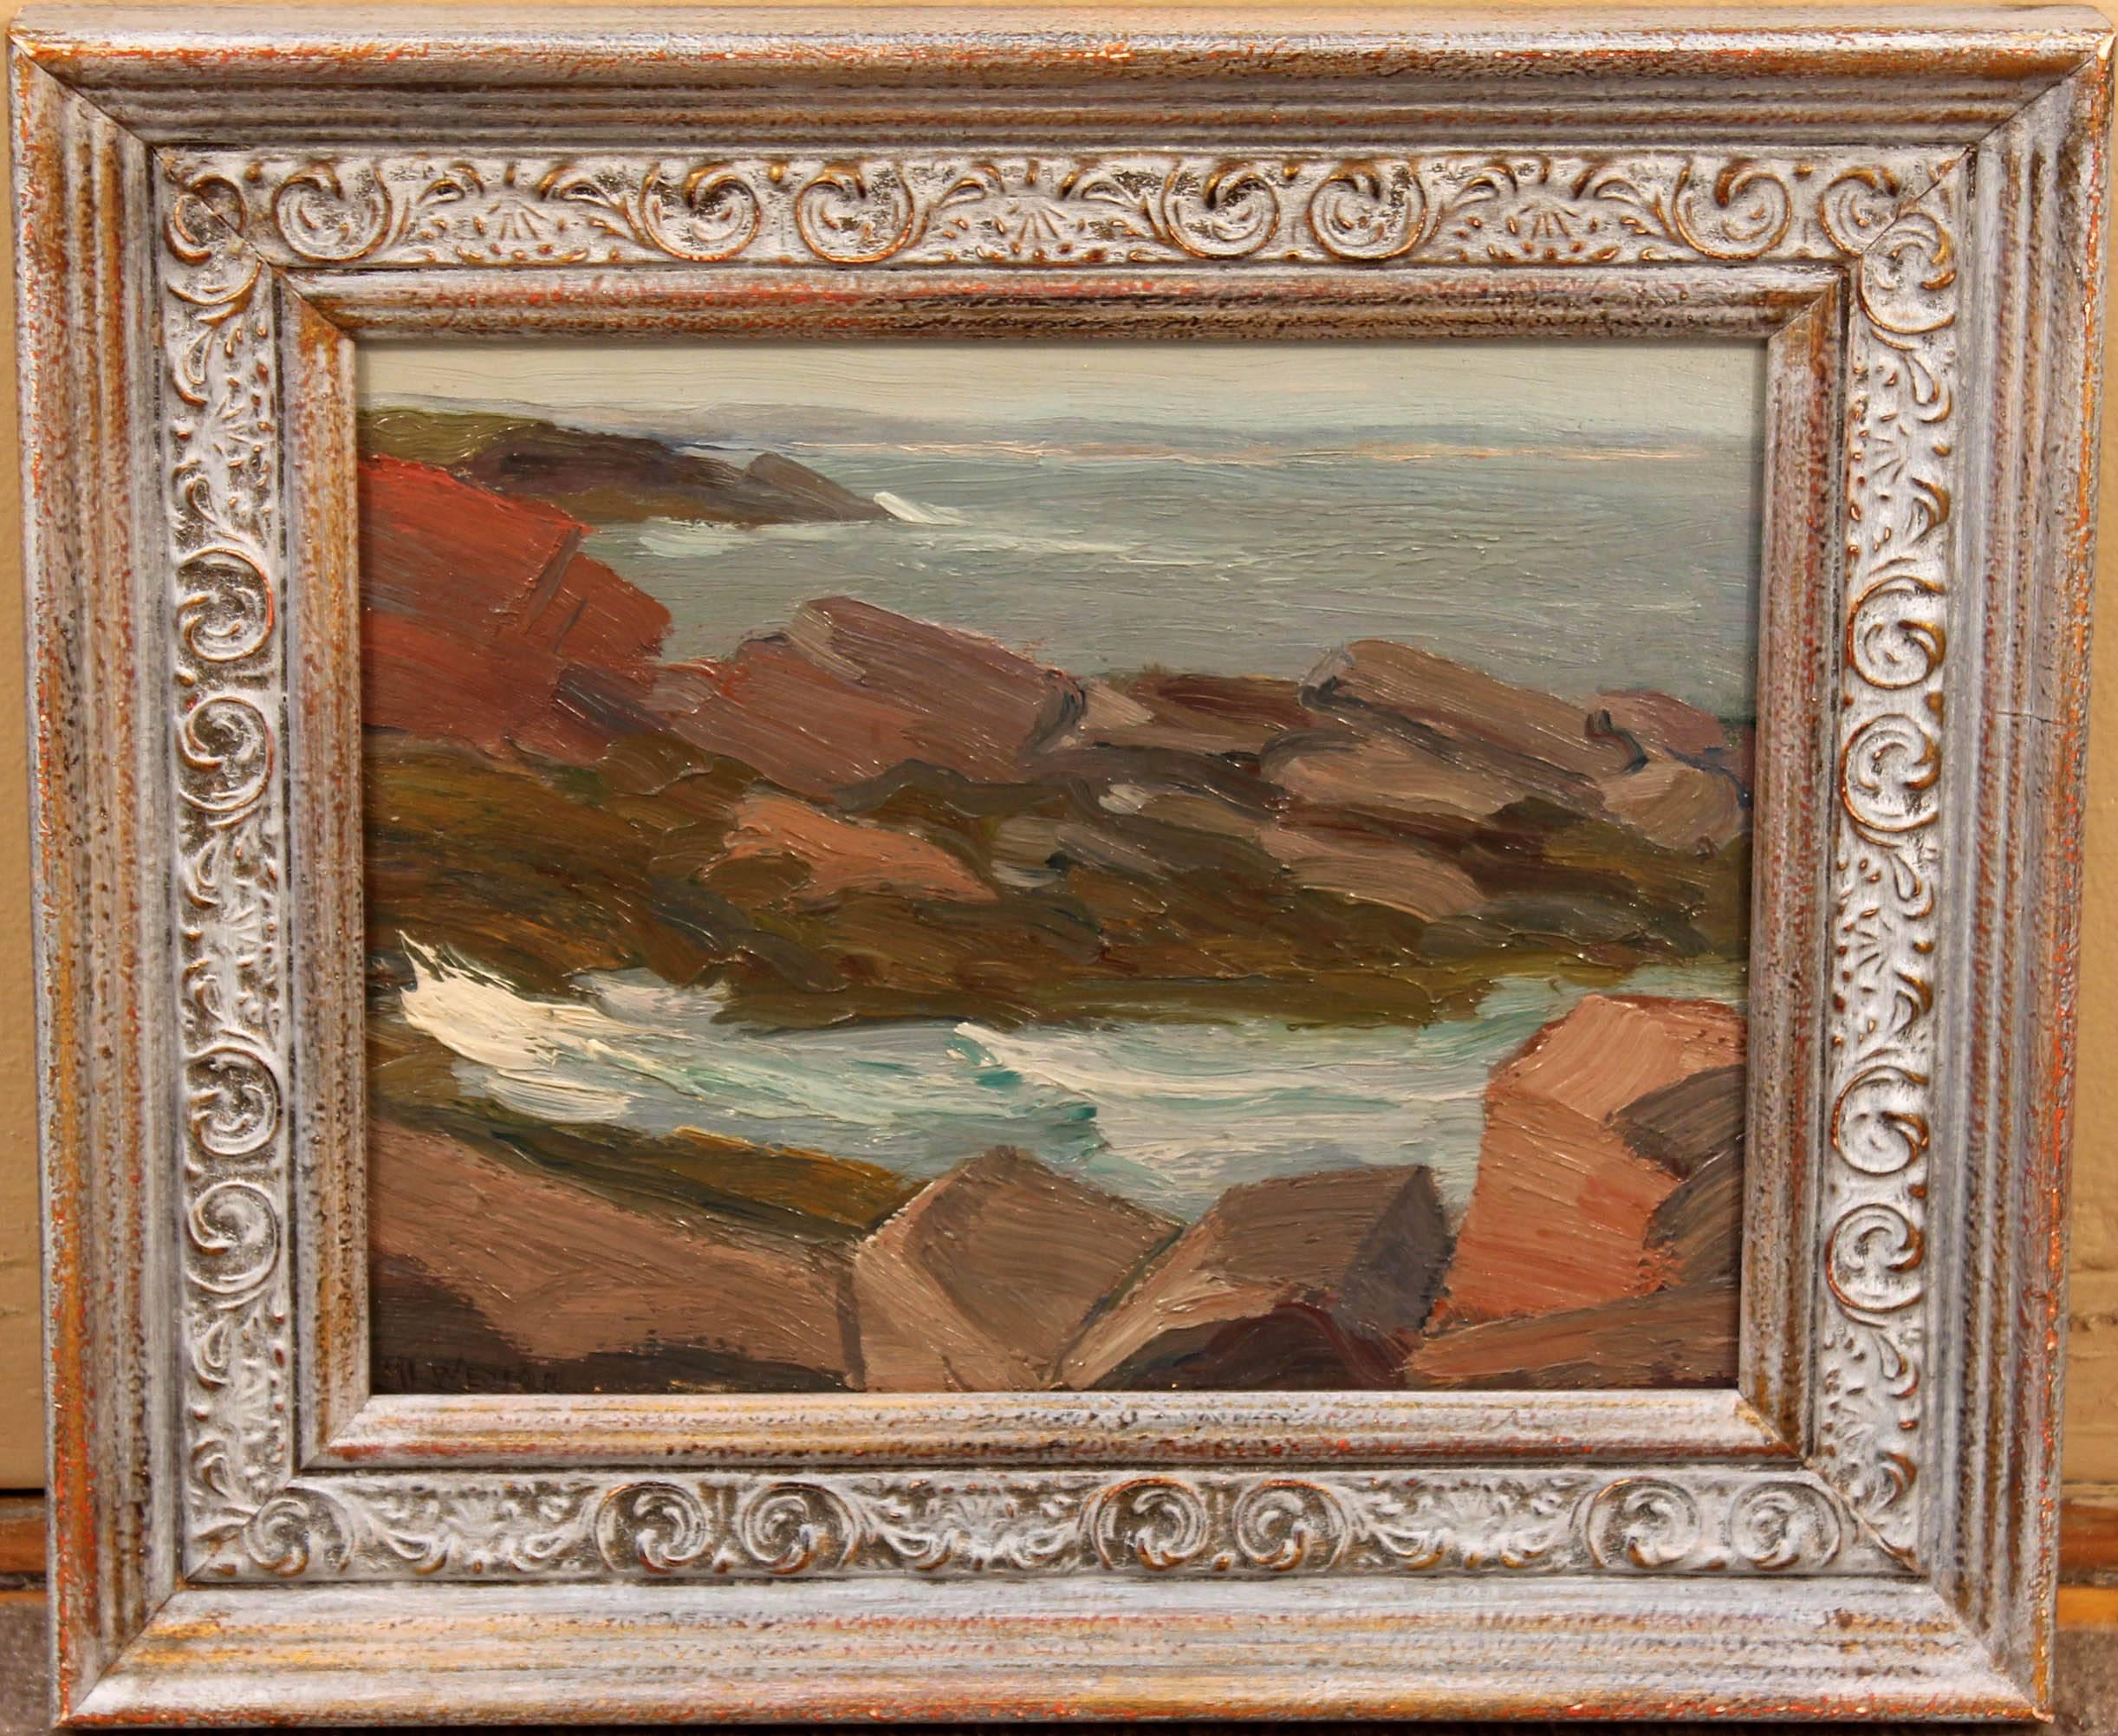 Painting: Oil painting. Impressionist seascape. Oil on board. Dated August 1914 on reverse. Matilda Leipold Weston was born in Germany on April 21, 1870. Mrs. Weston moved to southern California in the 1930s. She lived in Carlsbad and San Diego